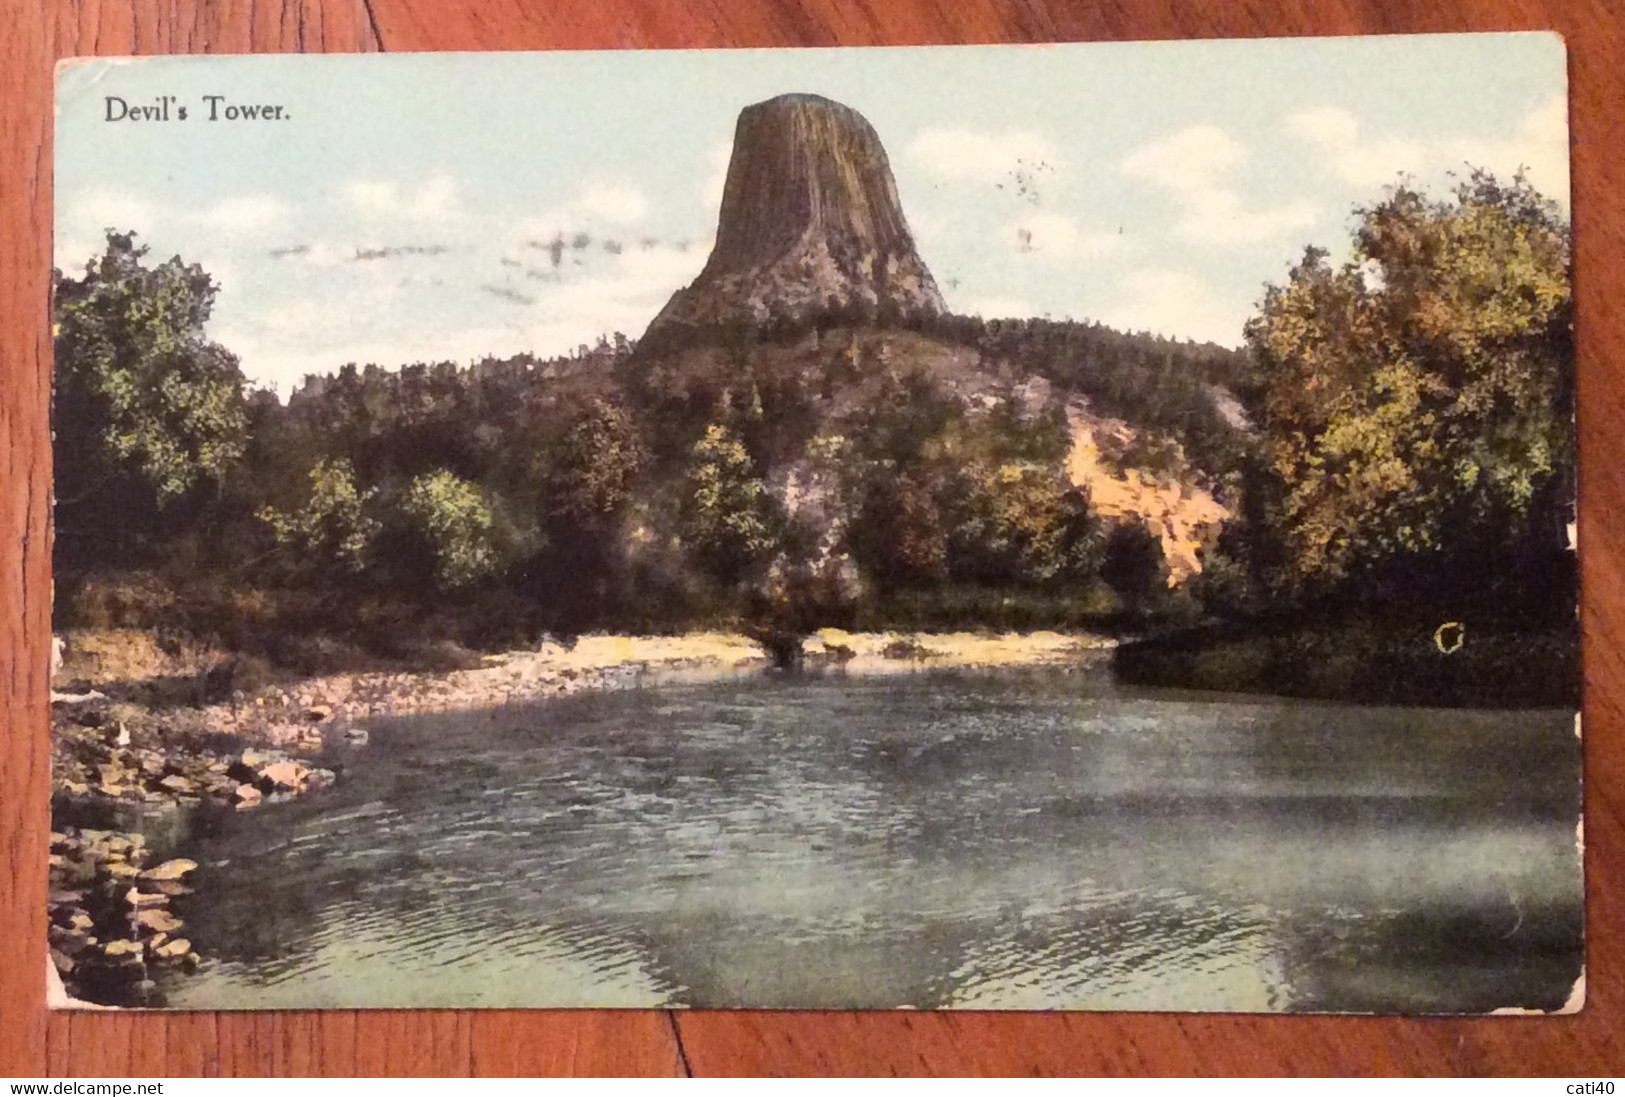 USA - DEVIL'S TOWER  - VINTAGE POST CARD FROM SHERIDAN  16 SEP  1911 - Fall River